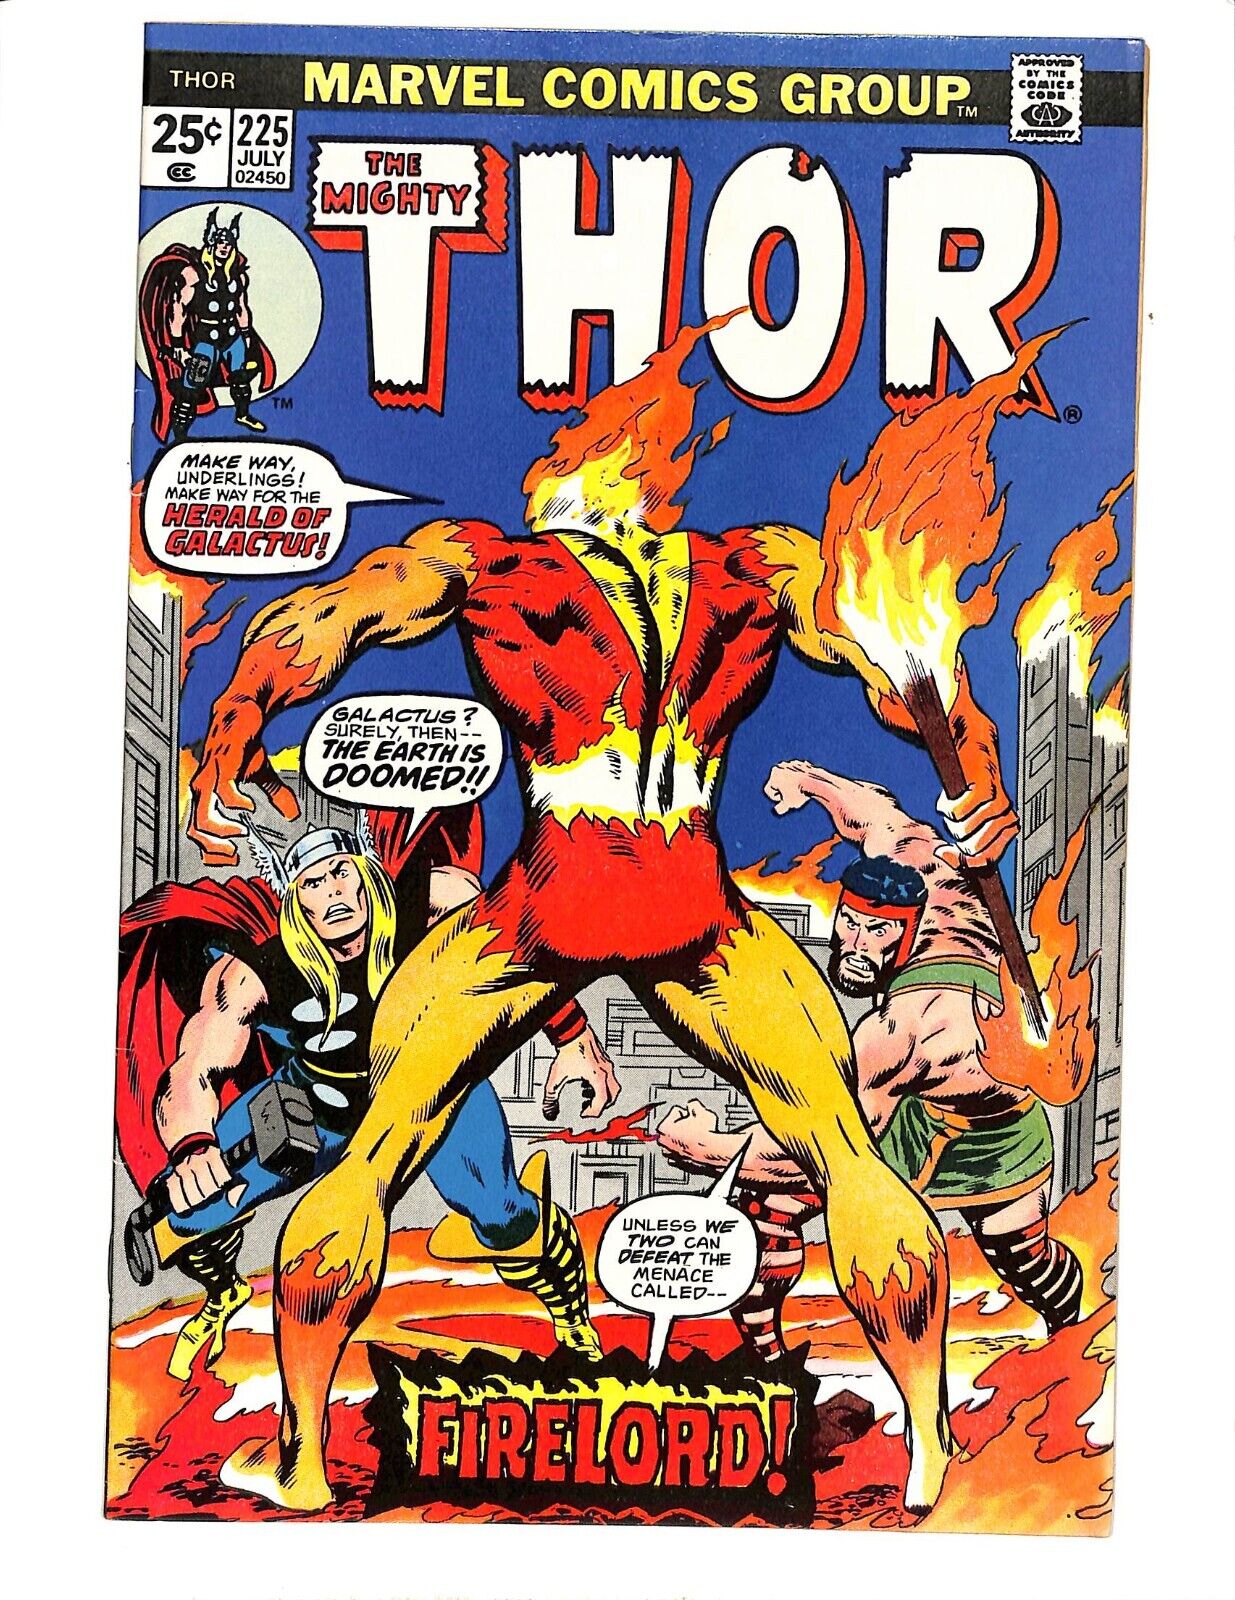 The Mighty Thor #225 - First Appearance of Firelord Marvel Comics 1974 (HB) 77